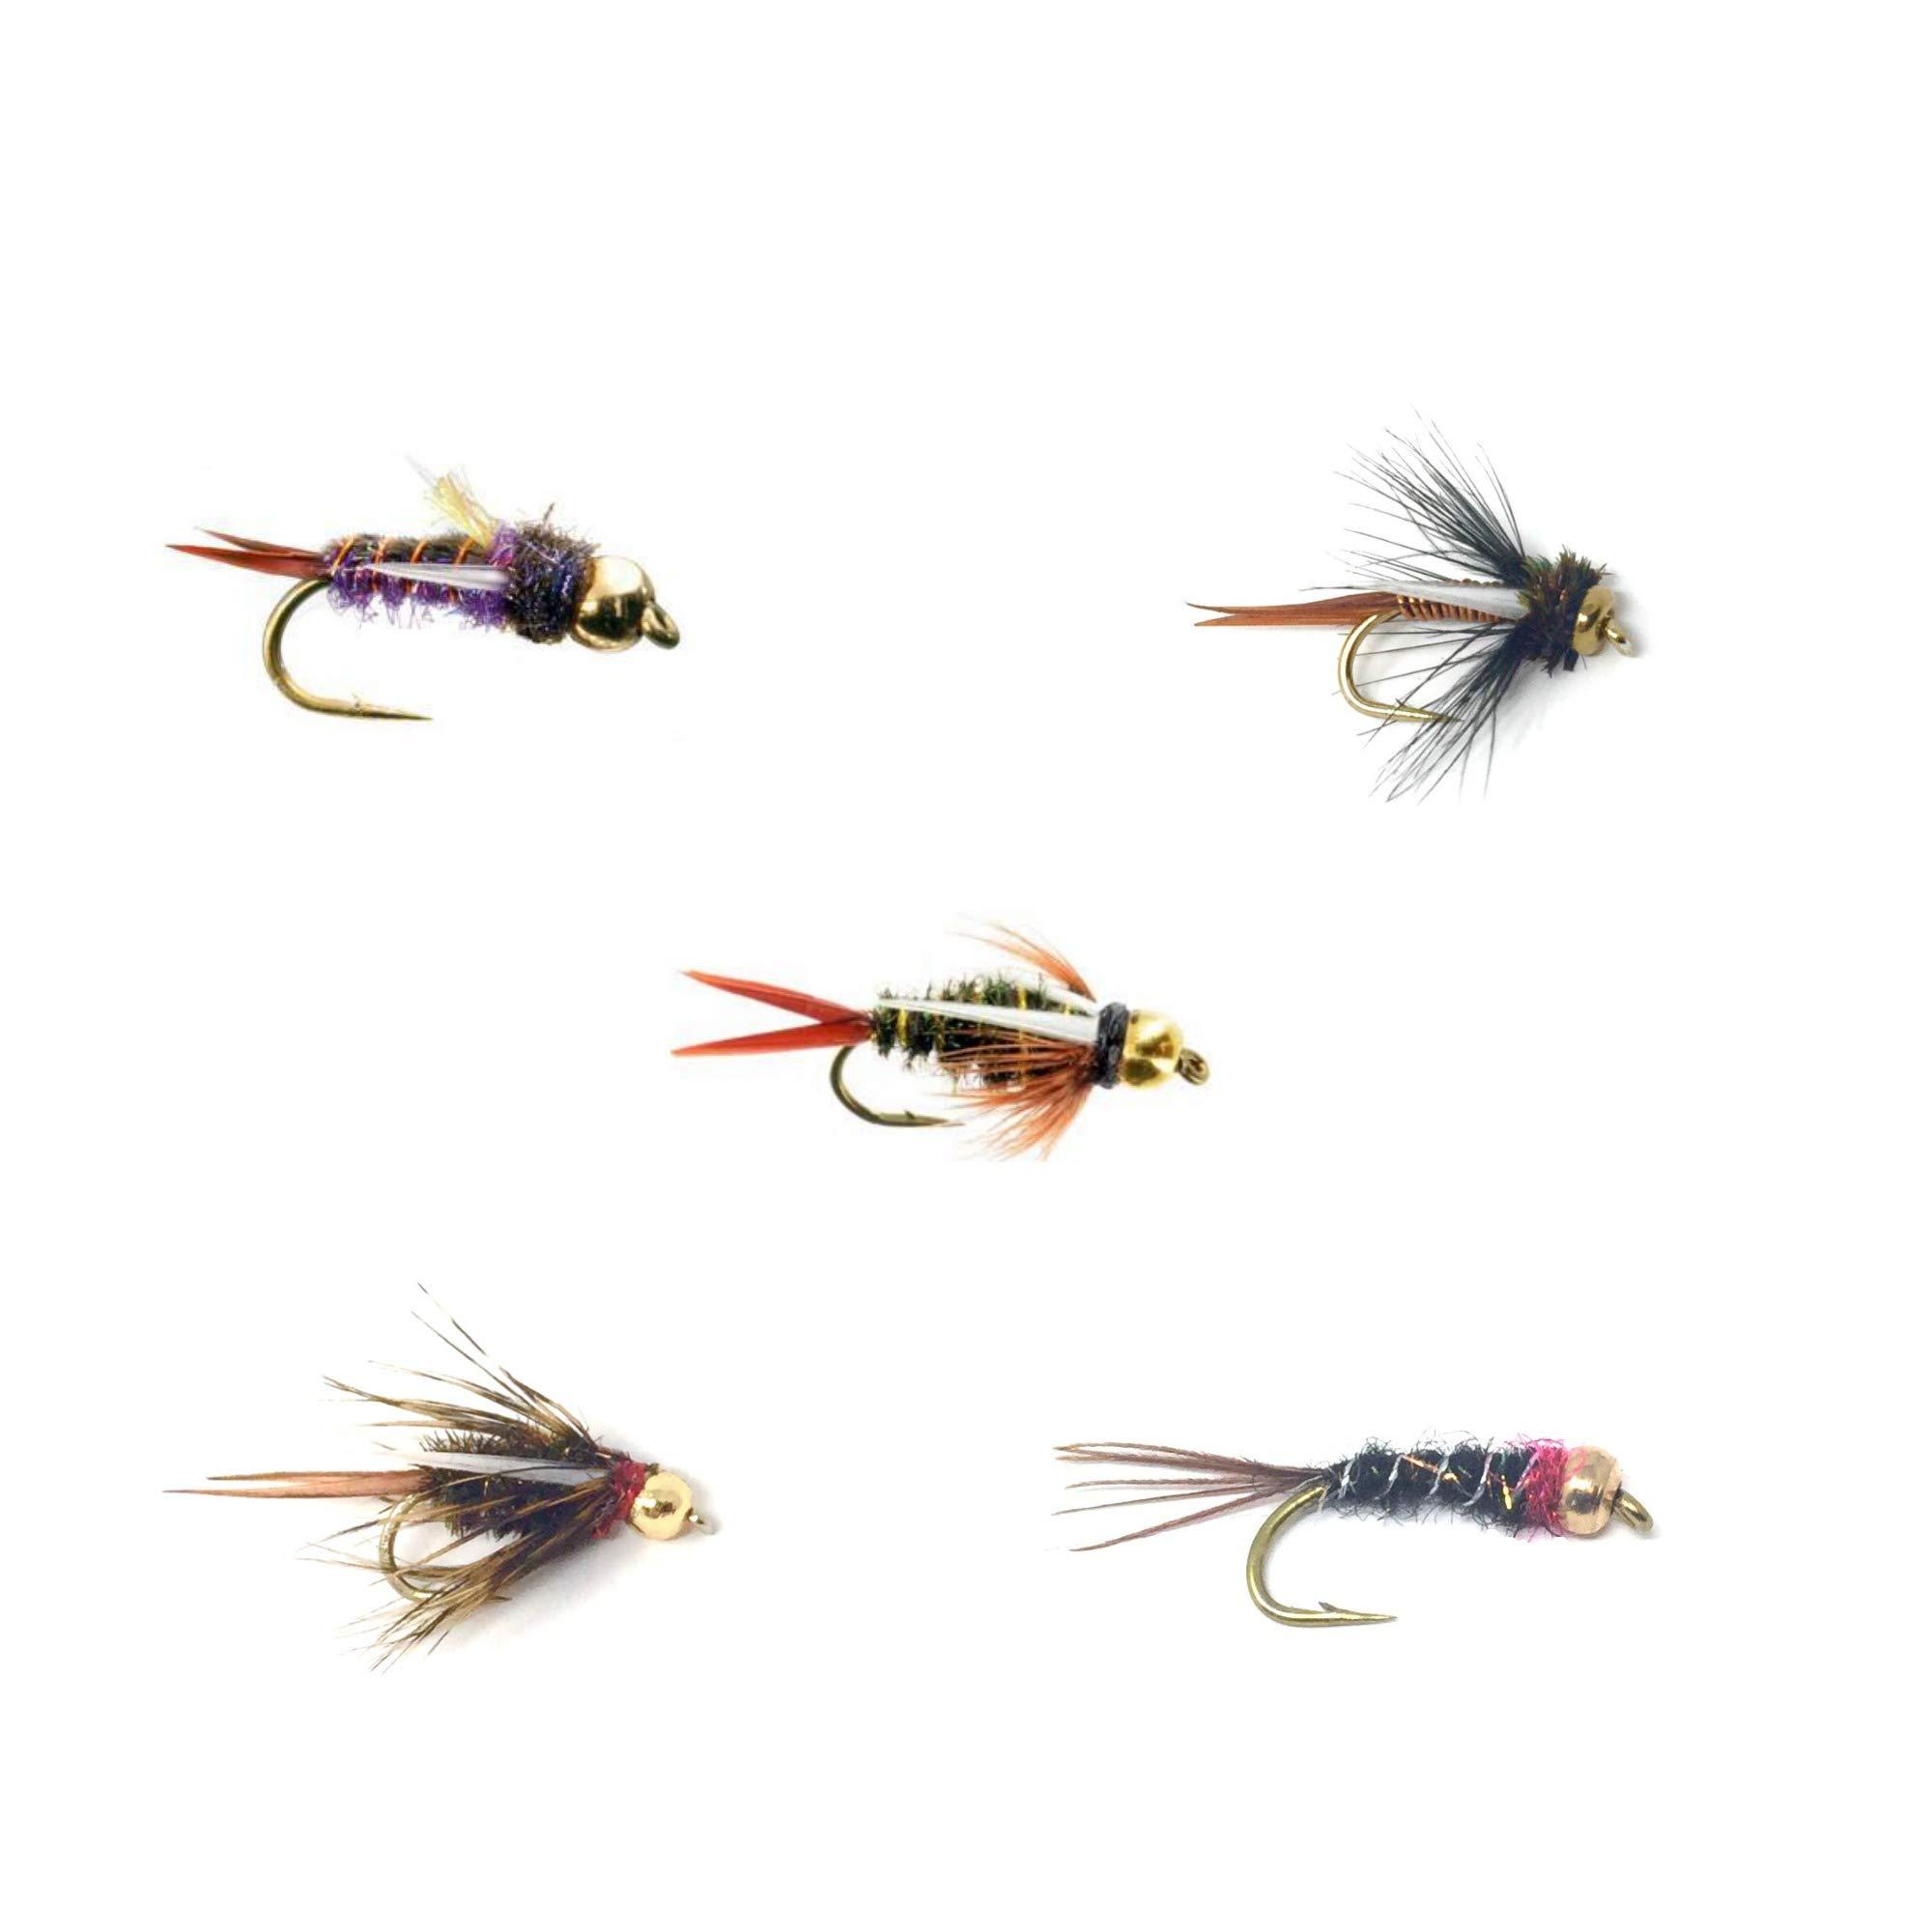 Feeder Creek Fly Fishing Trout Flies - Bead Head Prince Nymph Assortment -  5 Patterns in 3 Sizes - Prince, Montana, Electric, King, Purple, and Psycho